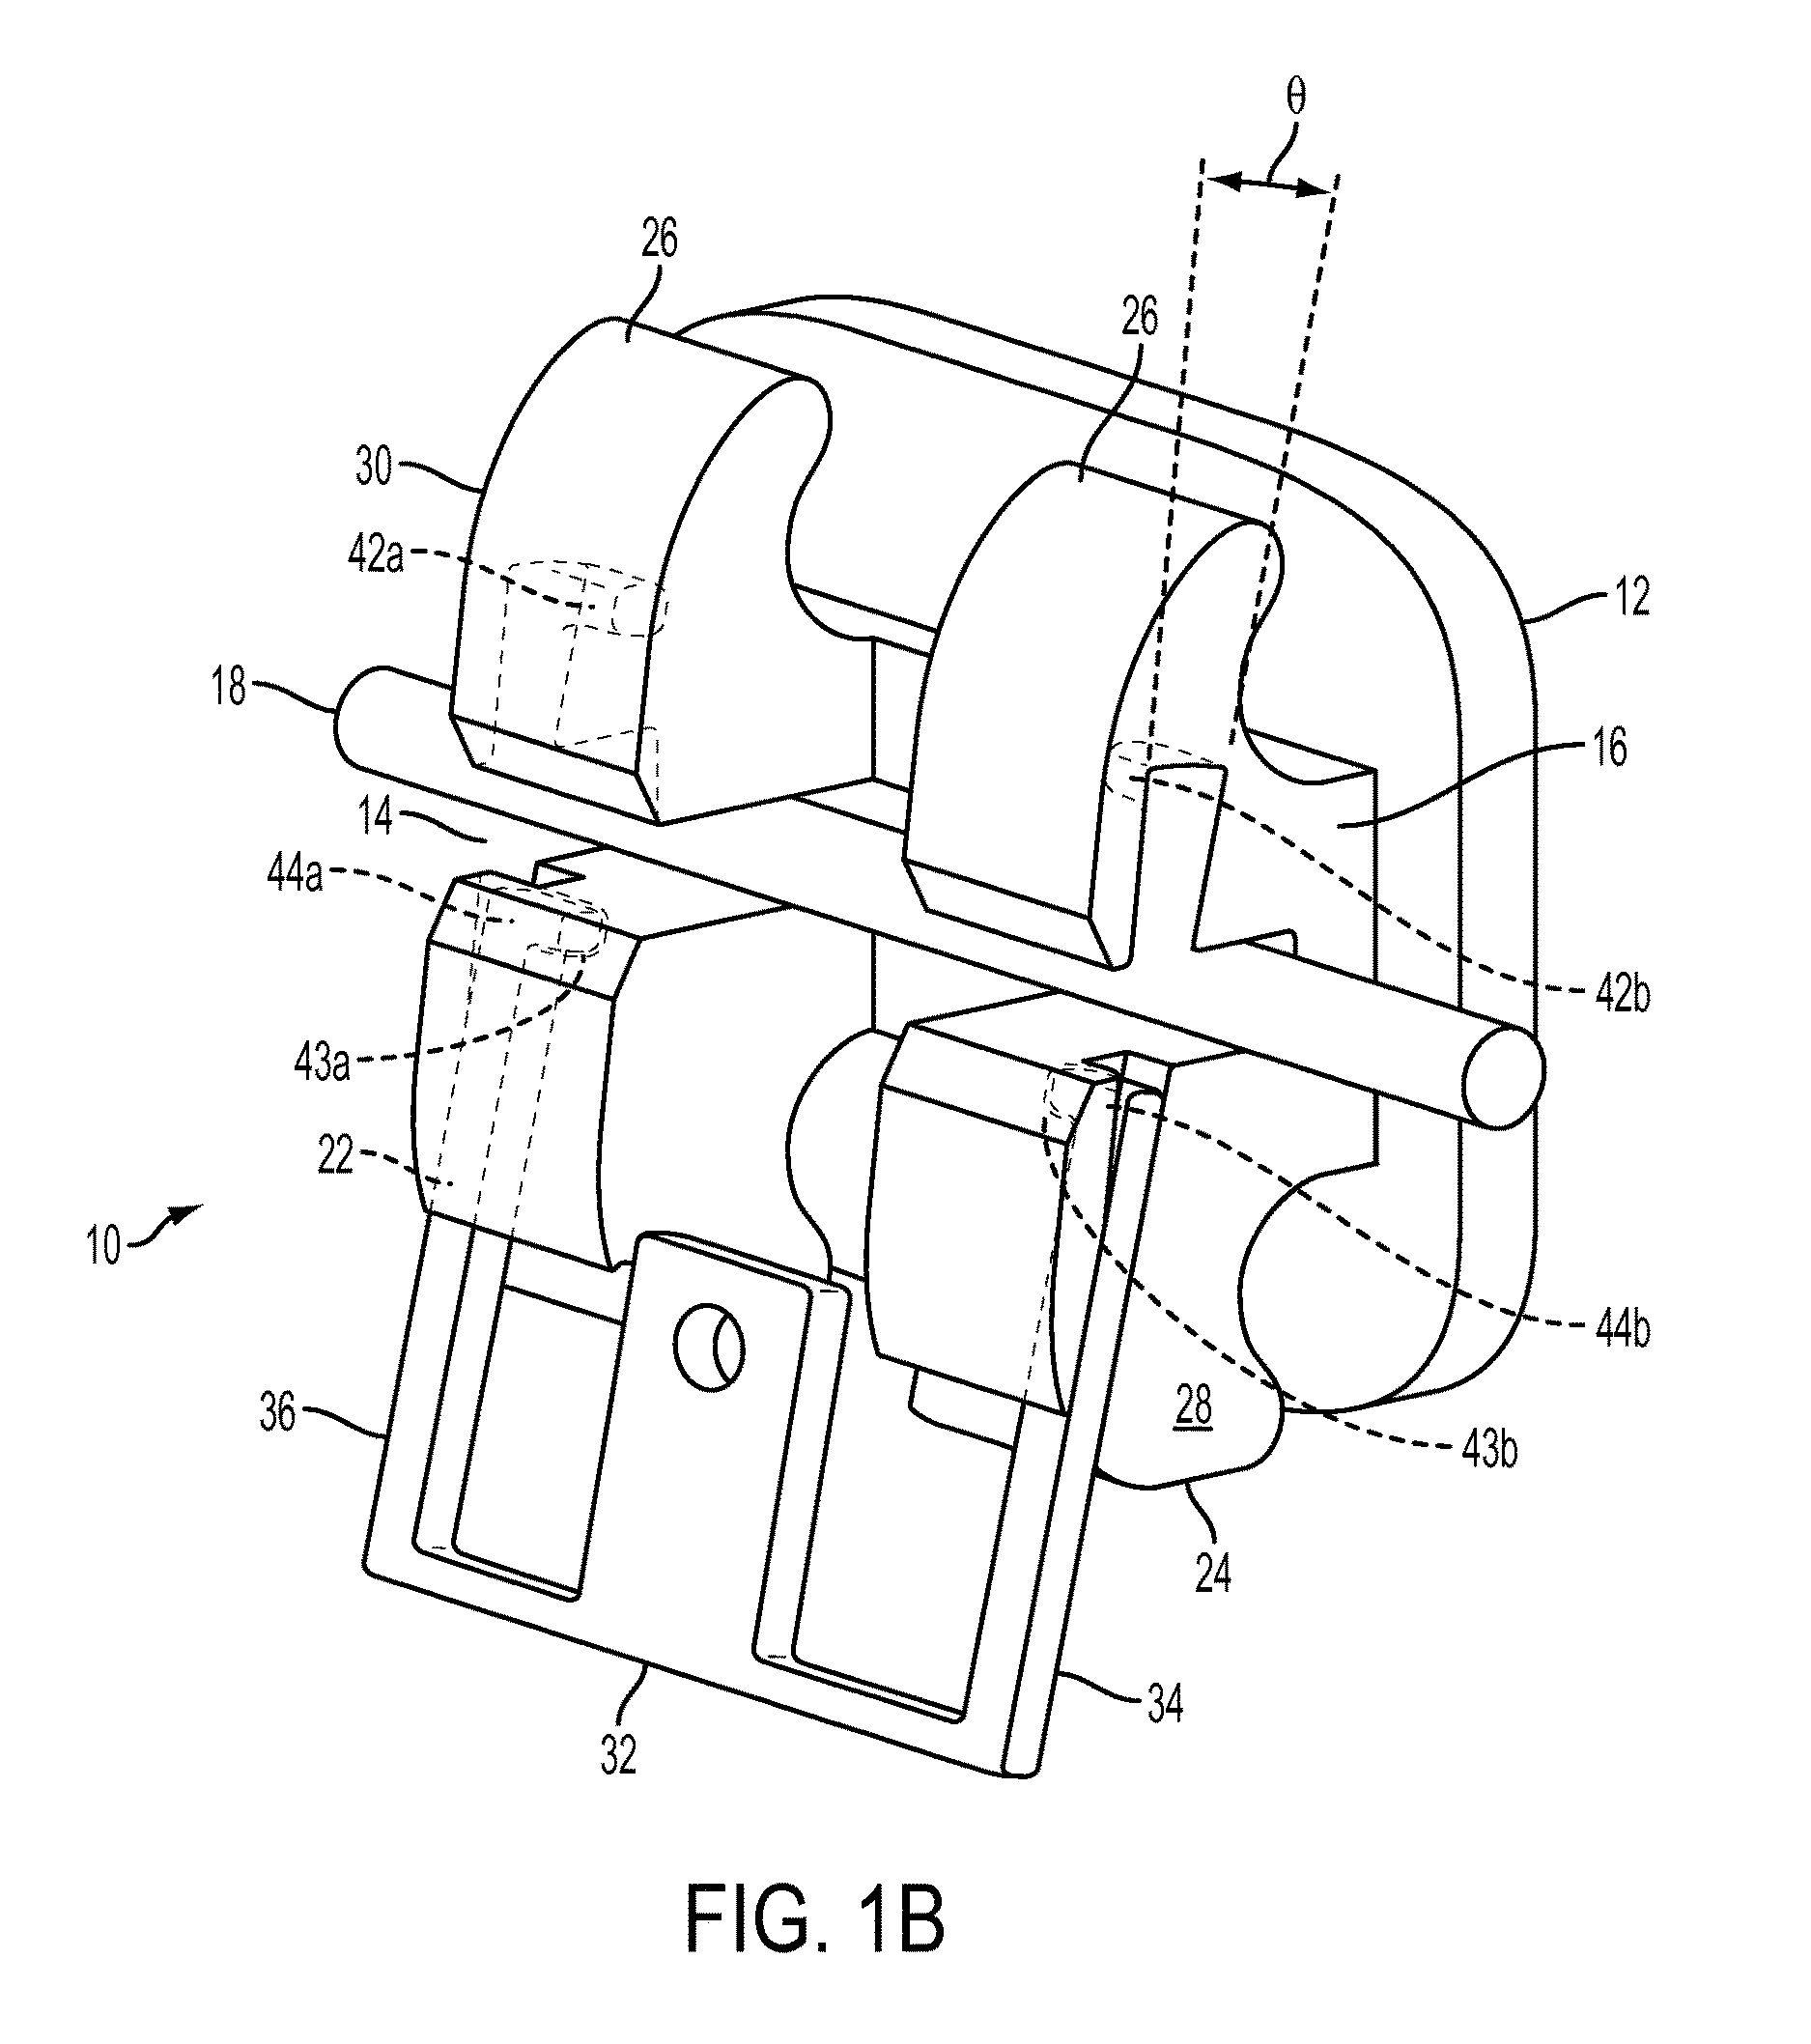 Orthodontic bracket with angled, curved shutter